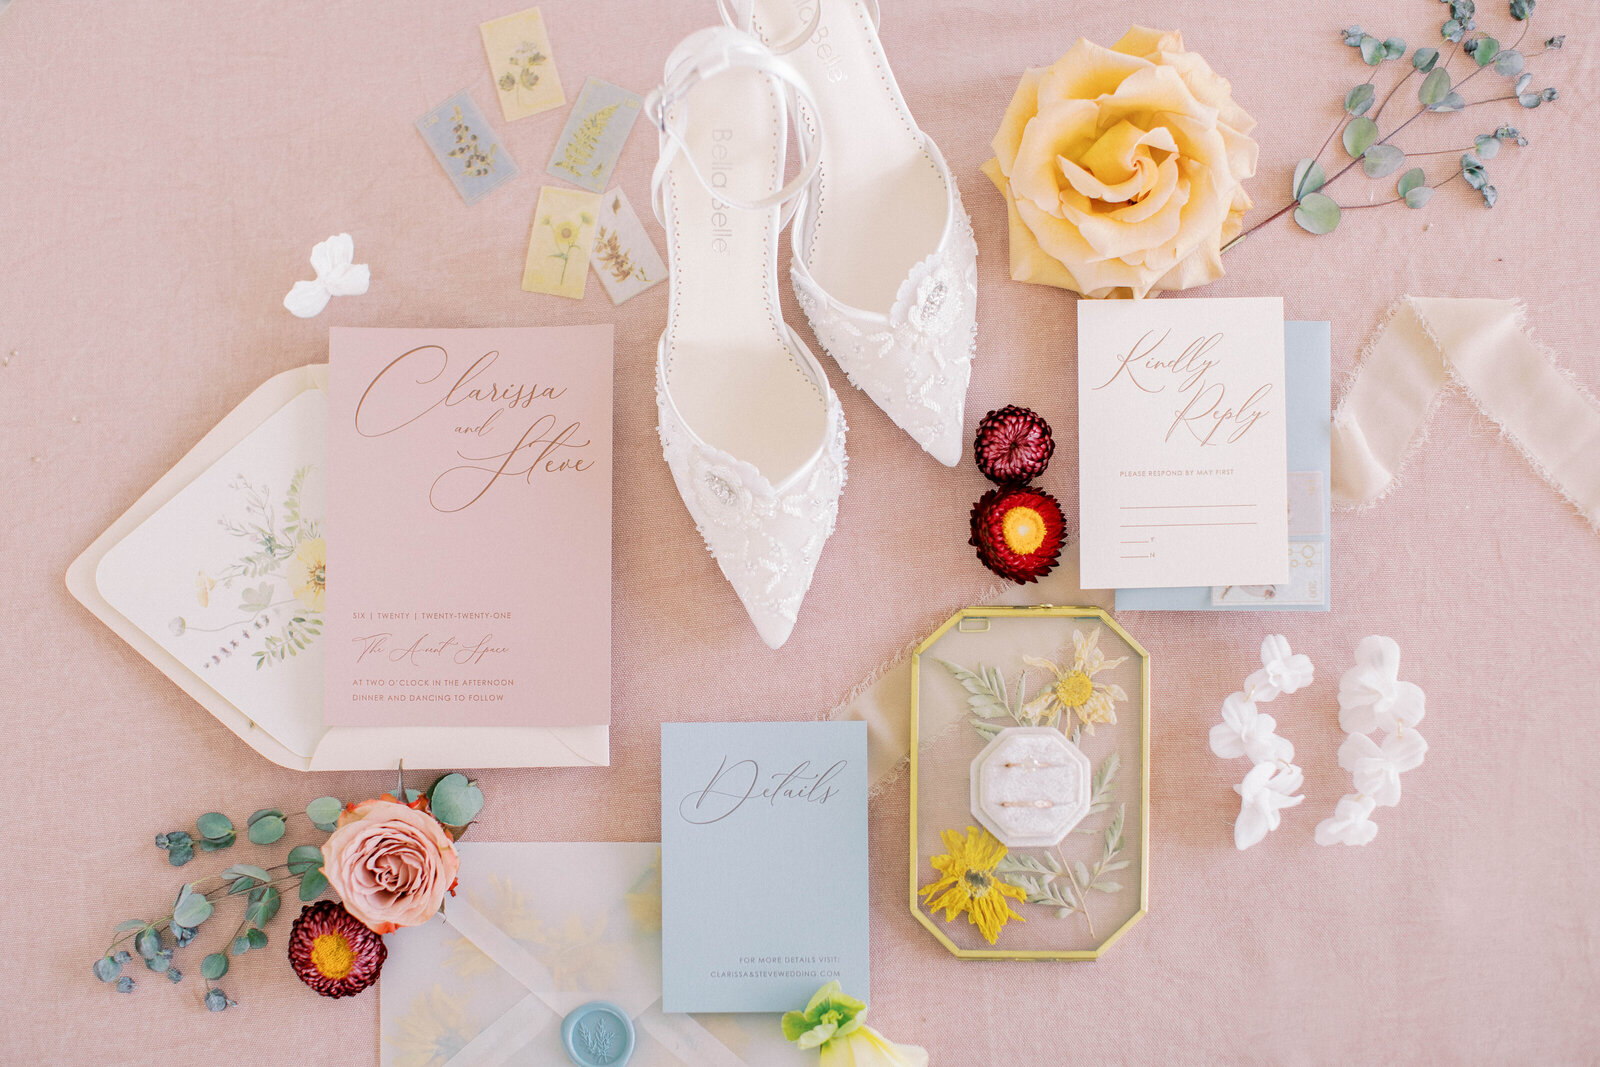 A-Vent Event Space soft pink and blue wedding detail flat lay